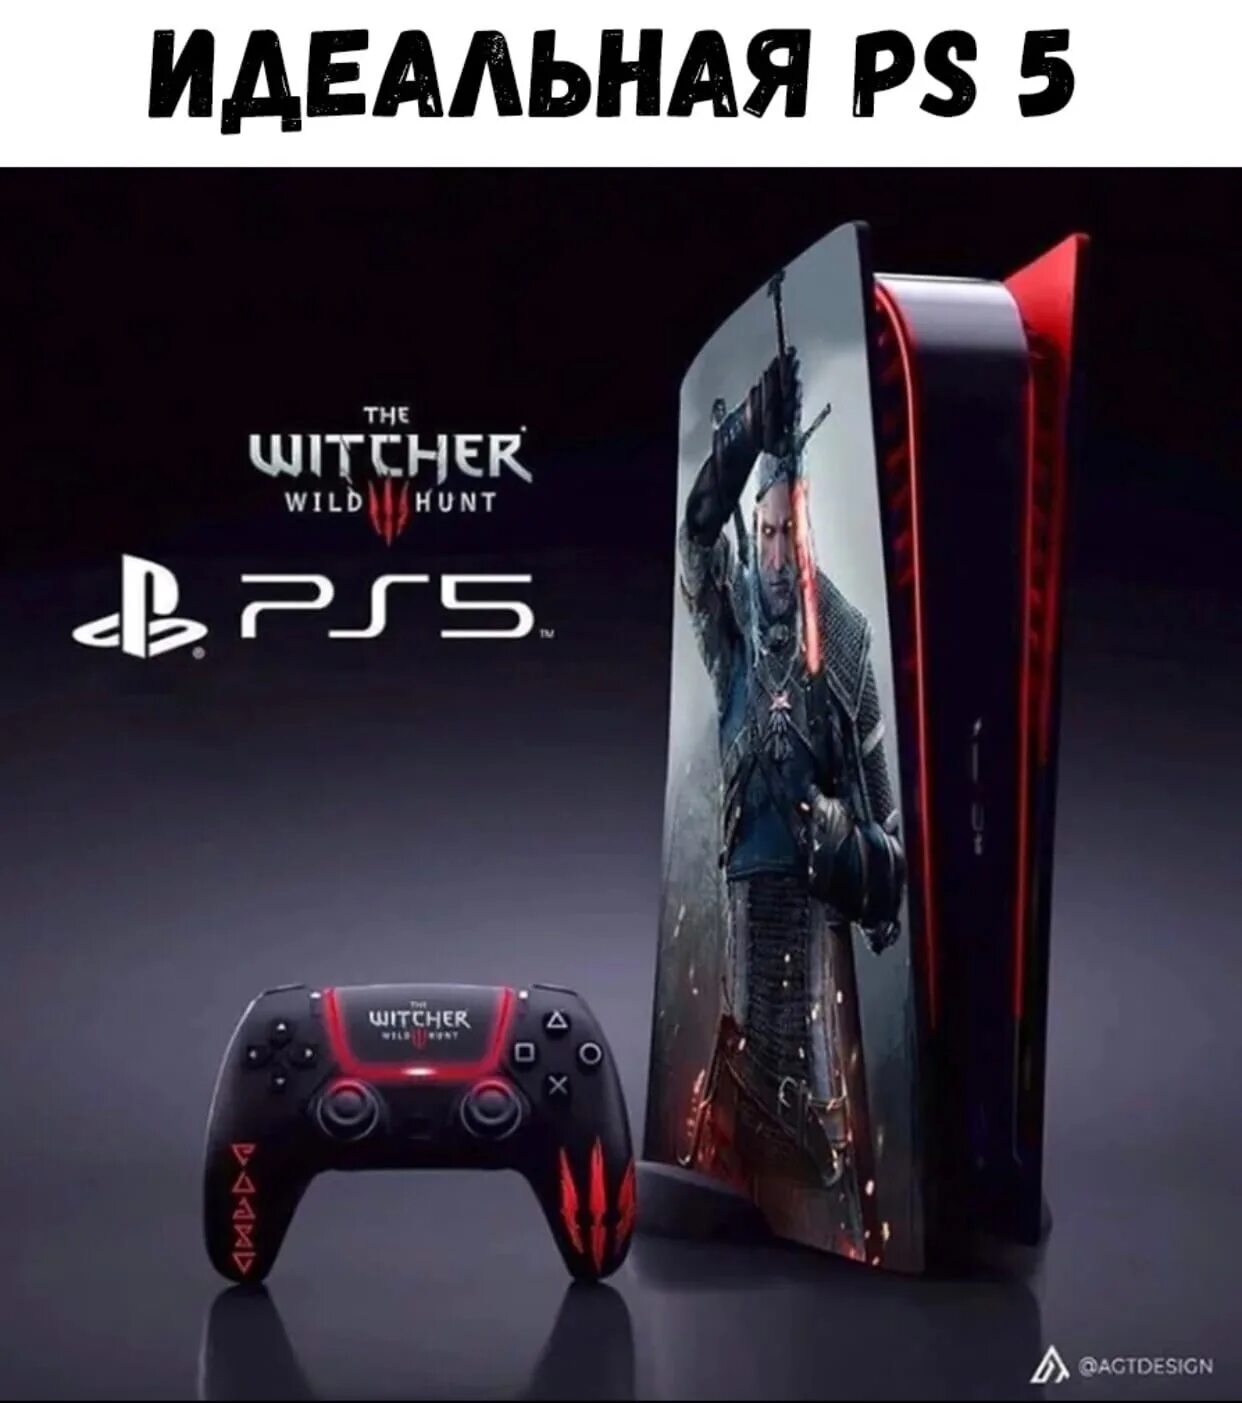 Кастомная ps5. Ps5 Console Sony. Приставка ПС 5. Sony PLAYSTATION ps5 Console. PLAYSTATION 5 ps5.